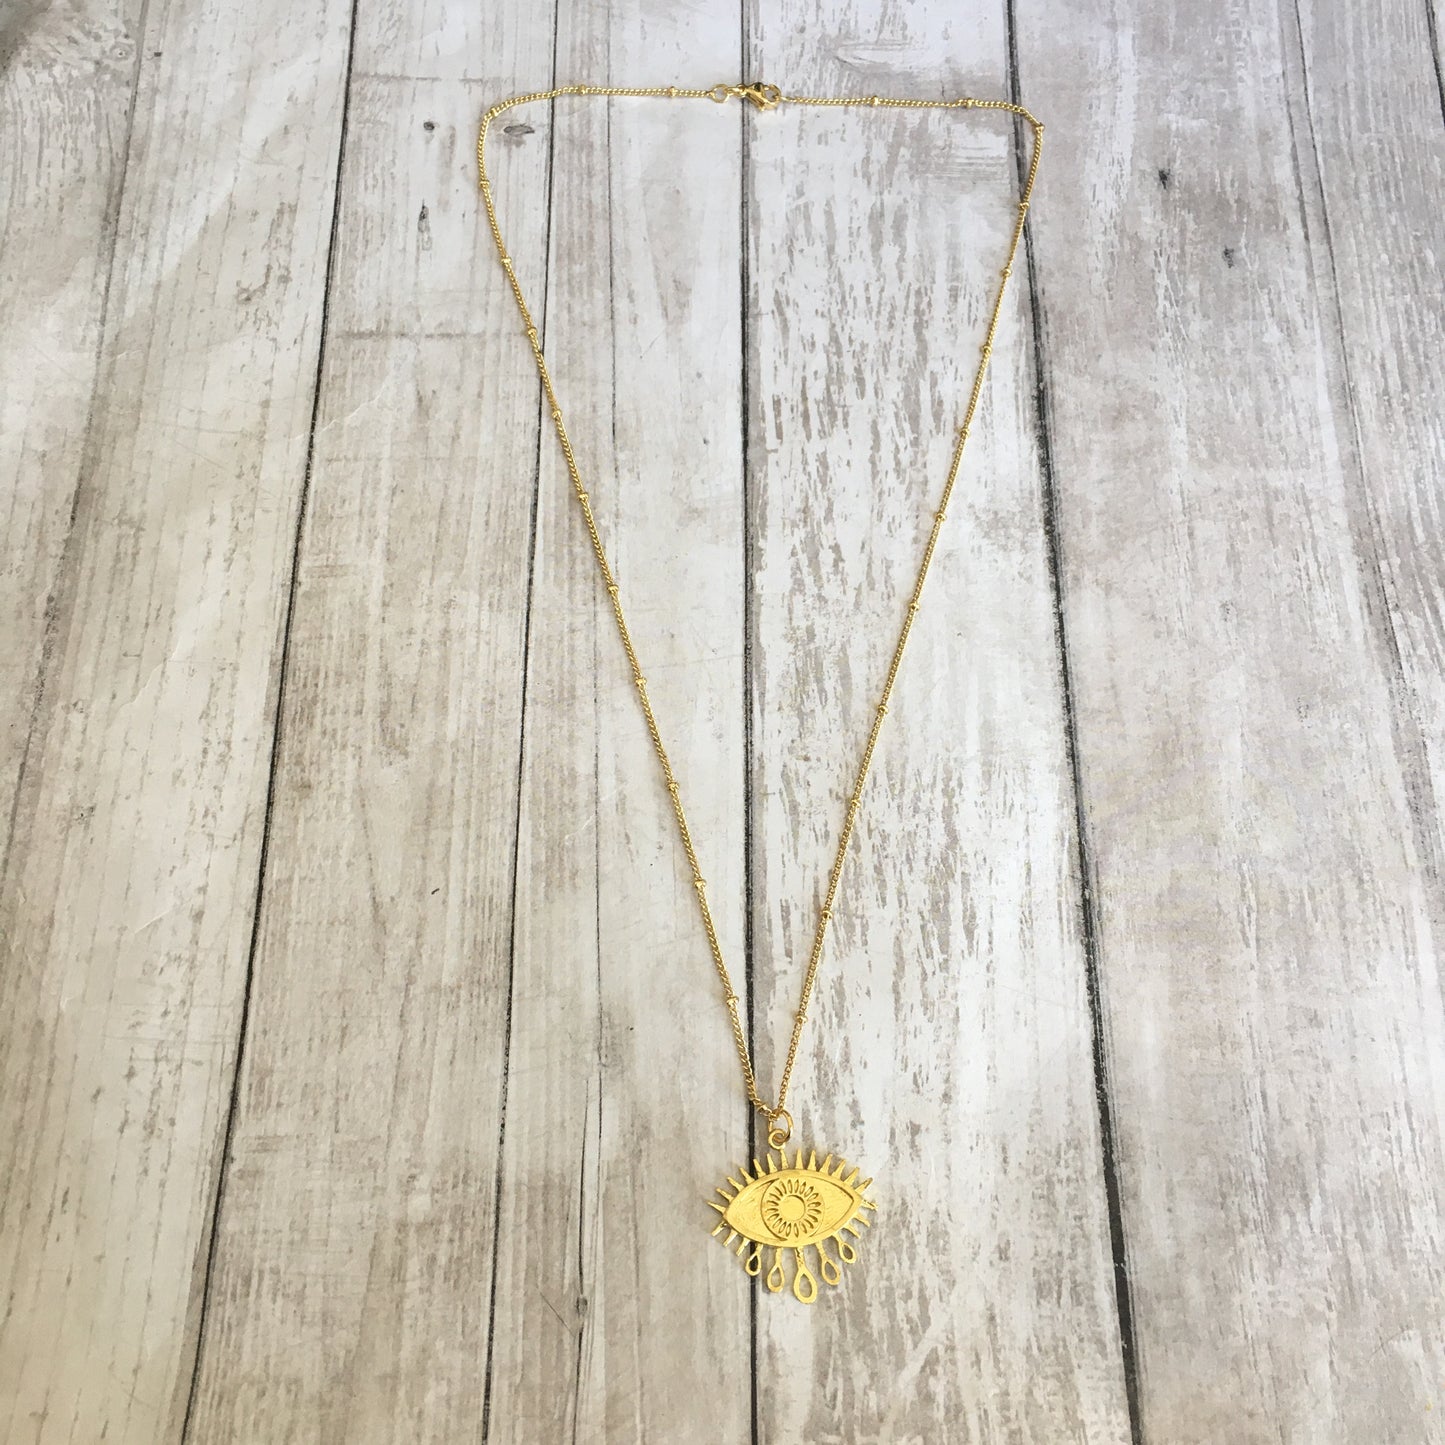 The Infinite Sadness in Gold Necklace